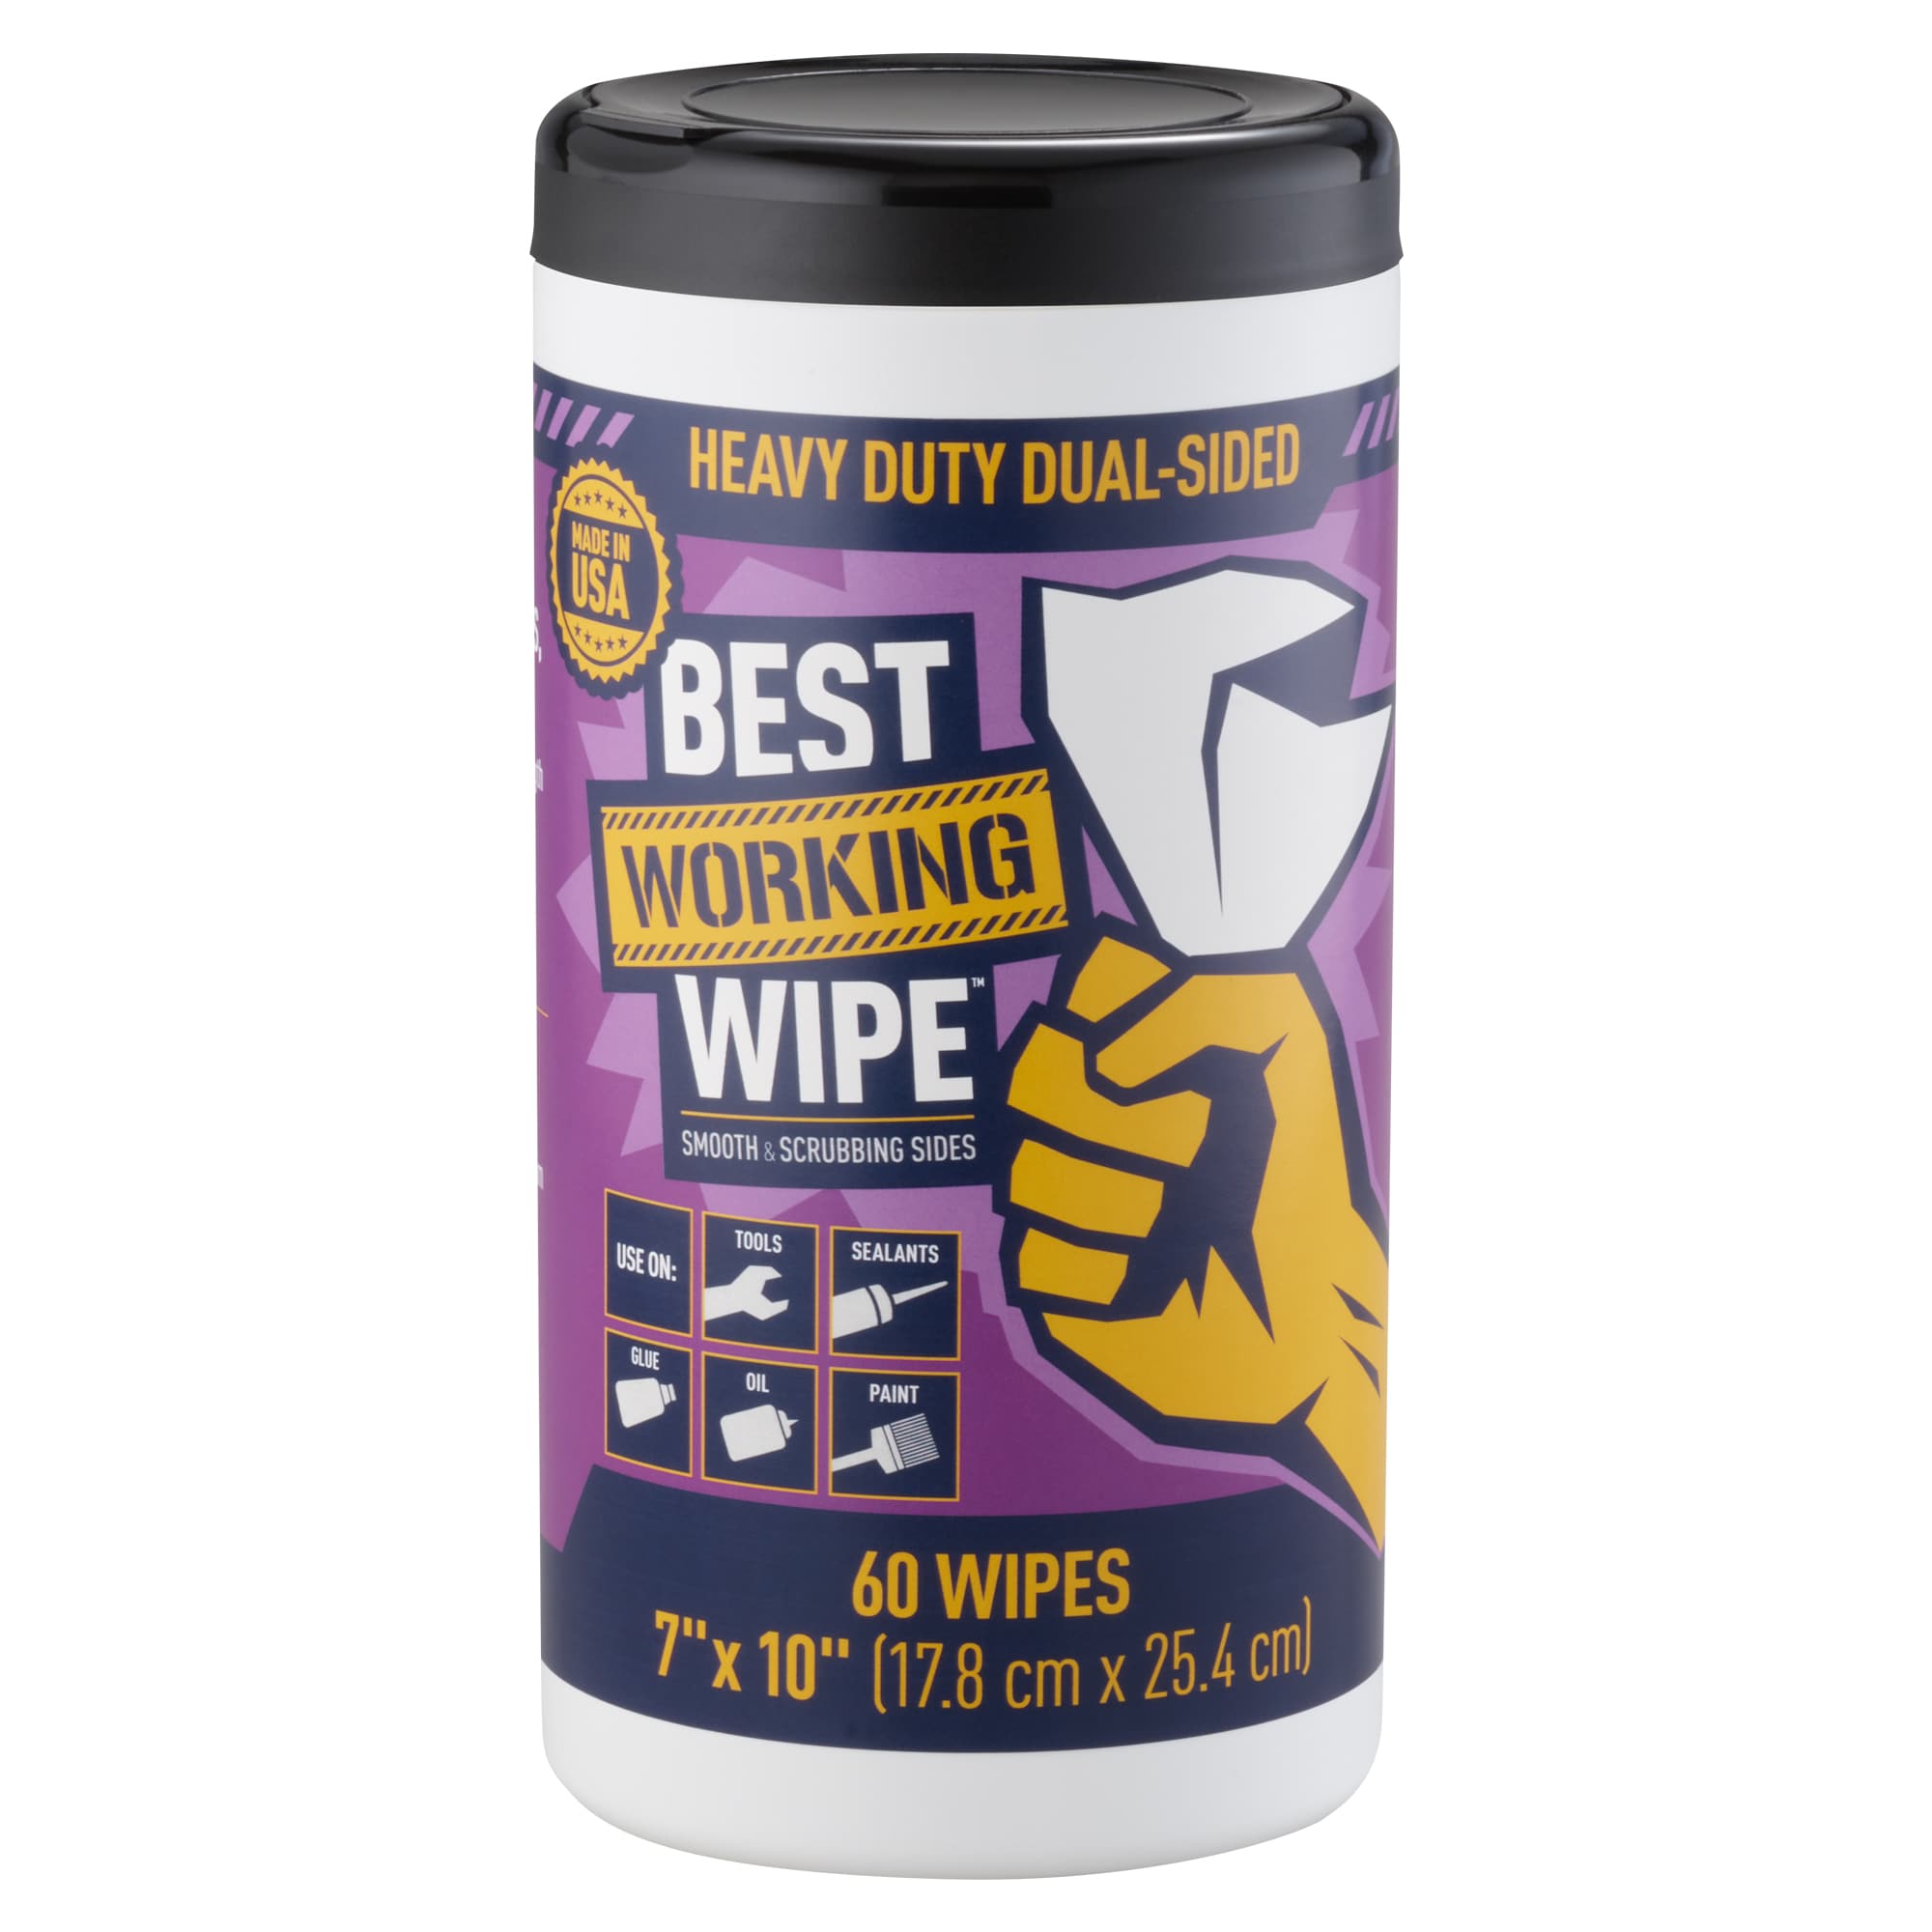 Reviews for Grime Boss 60-Count Surface and Hand Wipes Heavy Duty